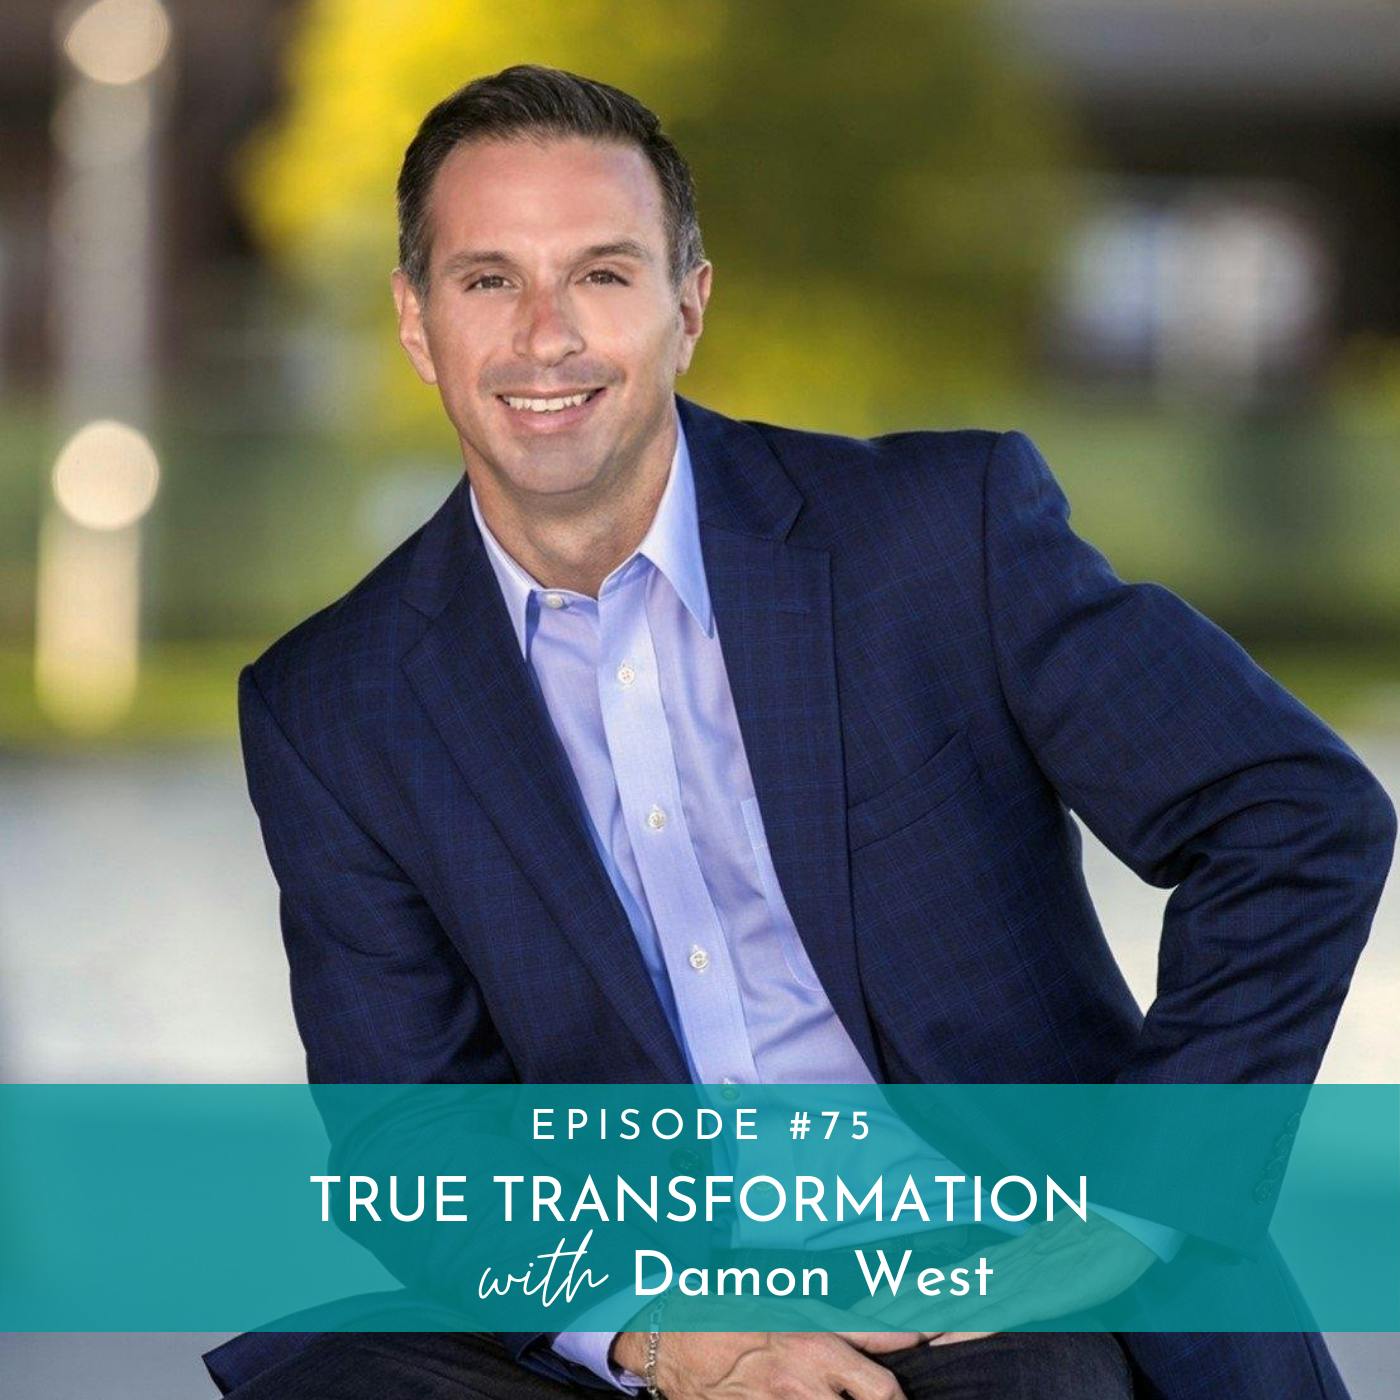 True Transformation. From Prison to Motivational Speaker with Damon West